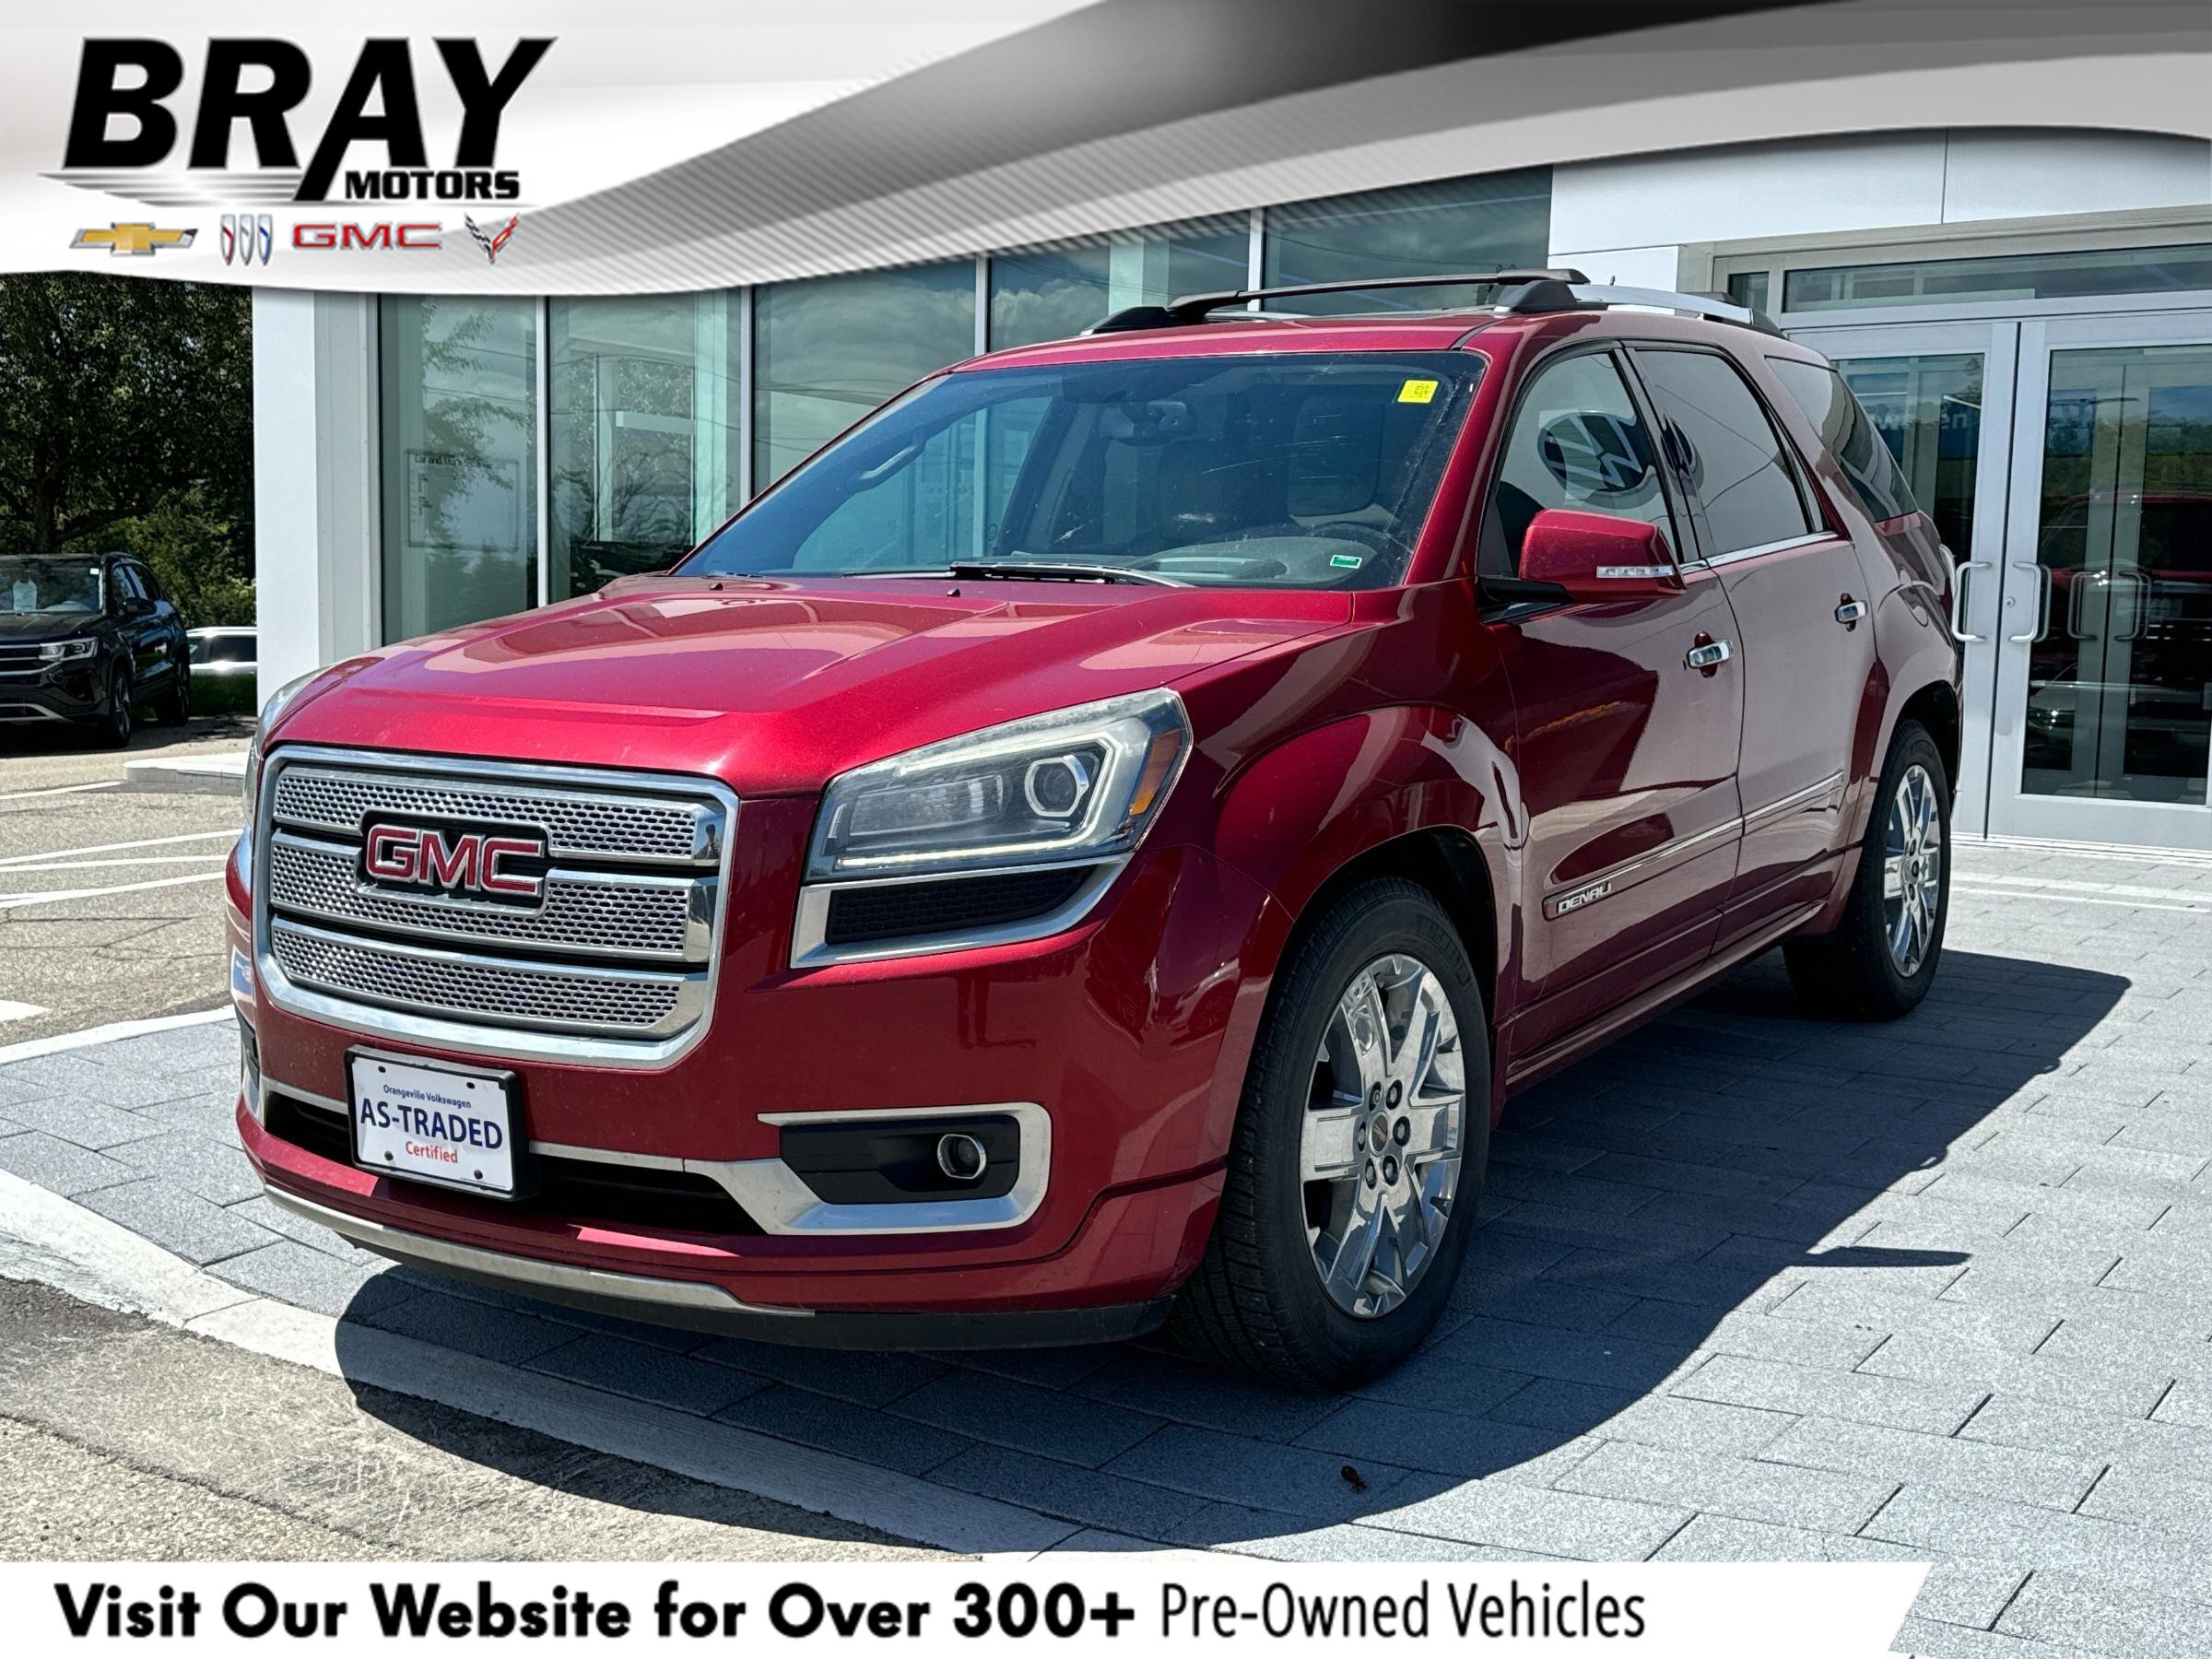 2013 GMC Acadia DenaliAS-TRADED CERTIFIED, AWD, LEATHER, CLEAN!